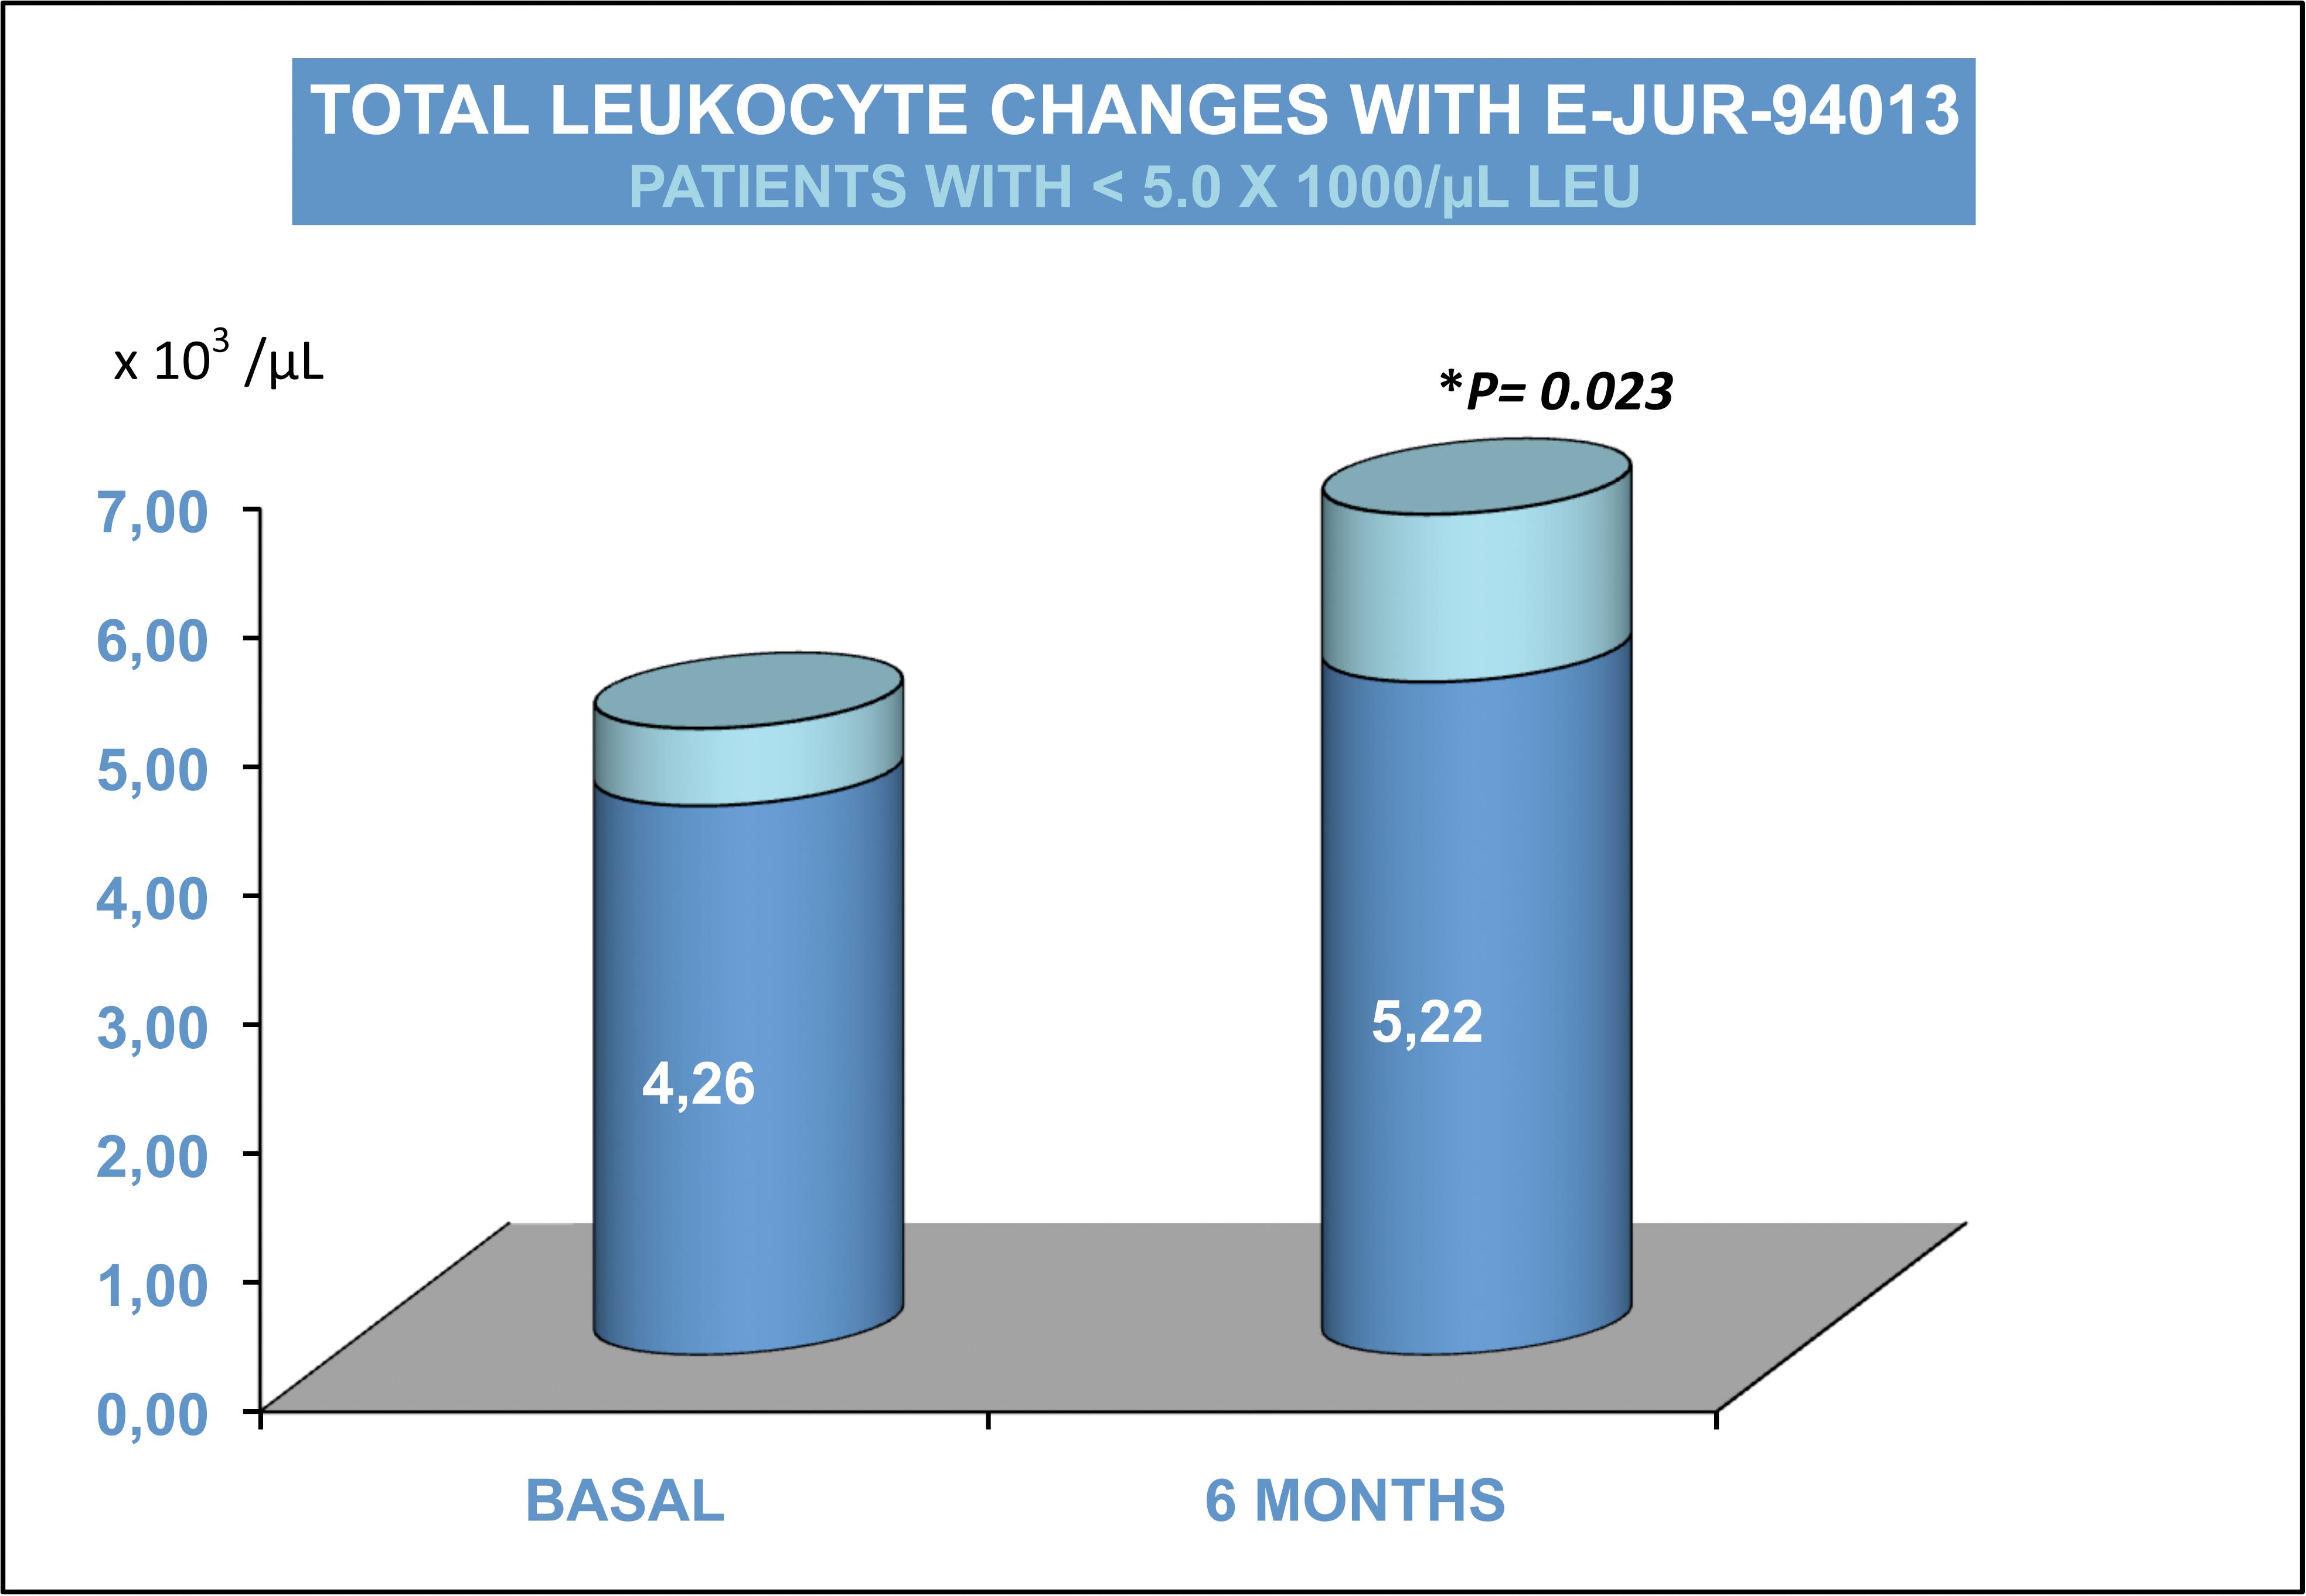 Leukocyte increase in patients with immunodeficiency after 6-month treatment with DefenVid®.